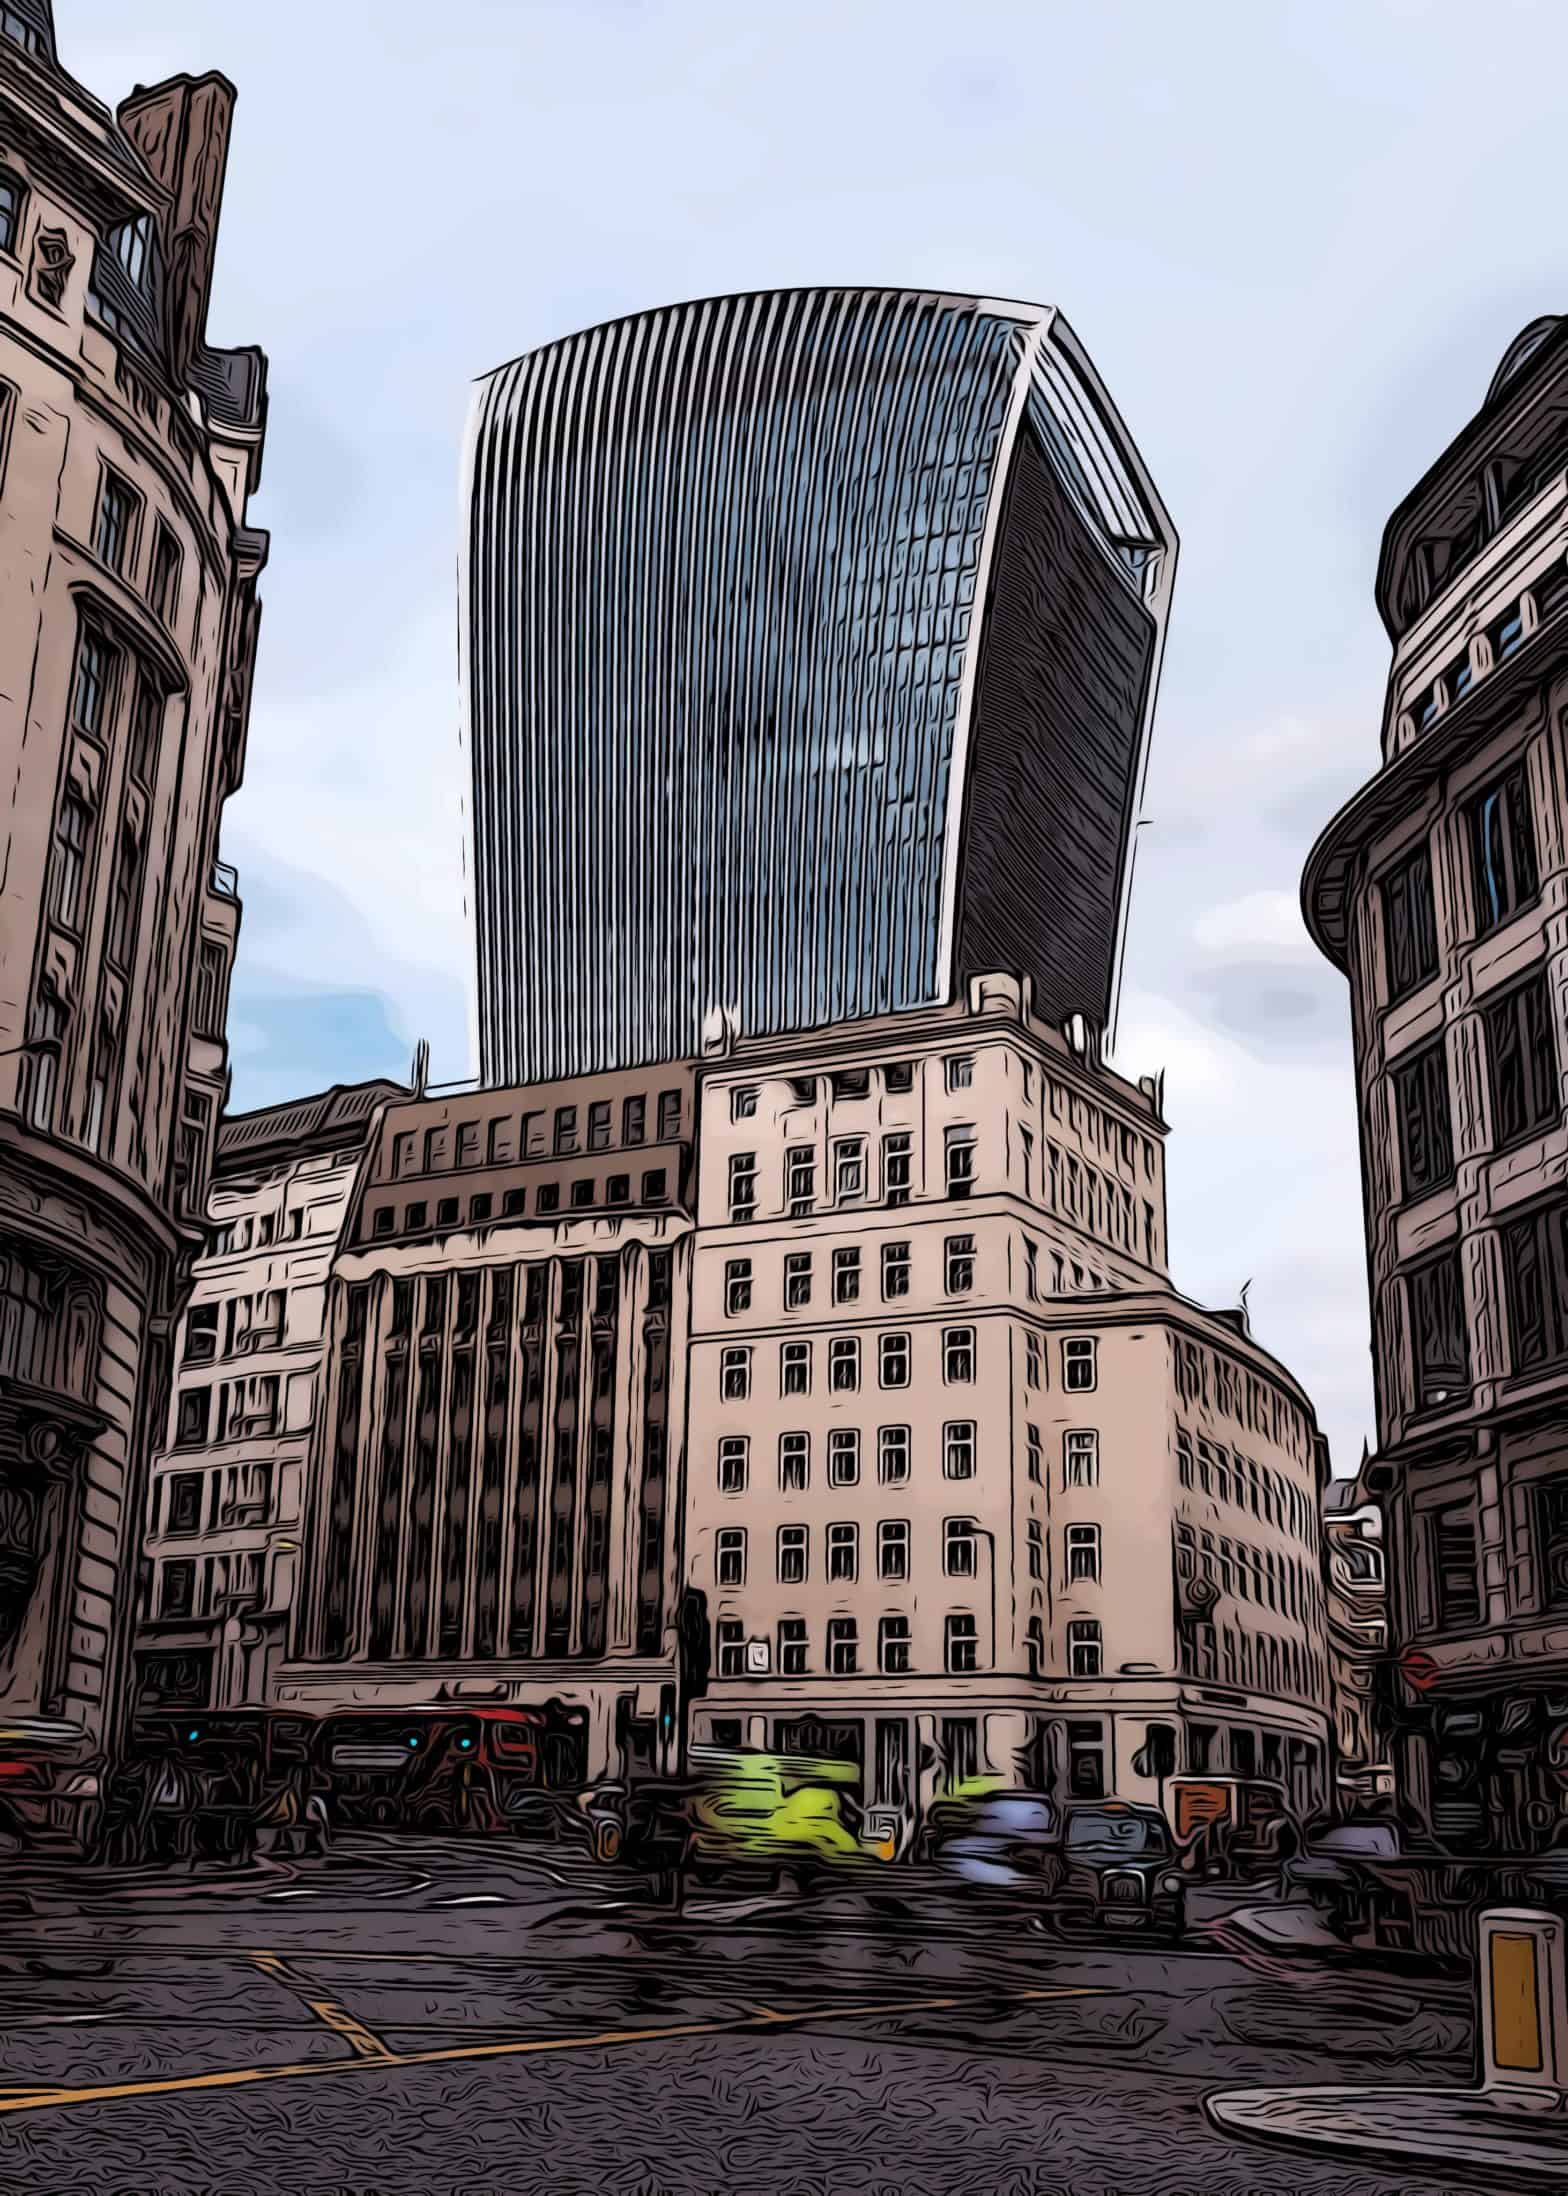 canary wharf facts the group constructed the walkie talkie building at 20 fenchurch street